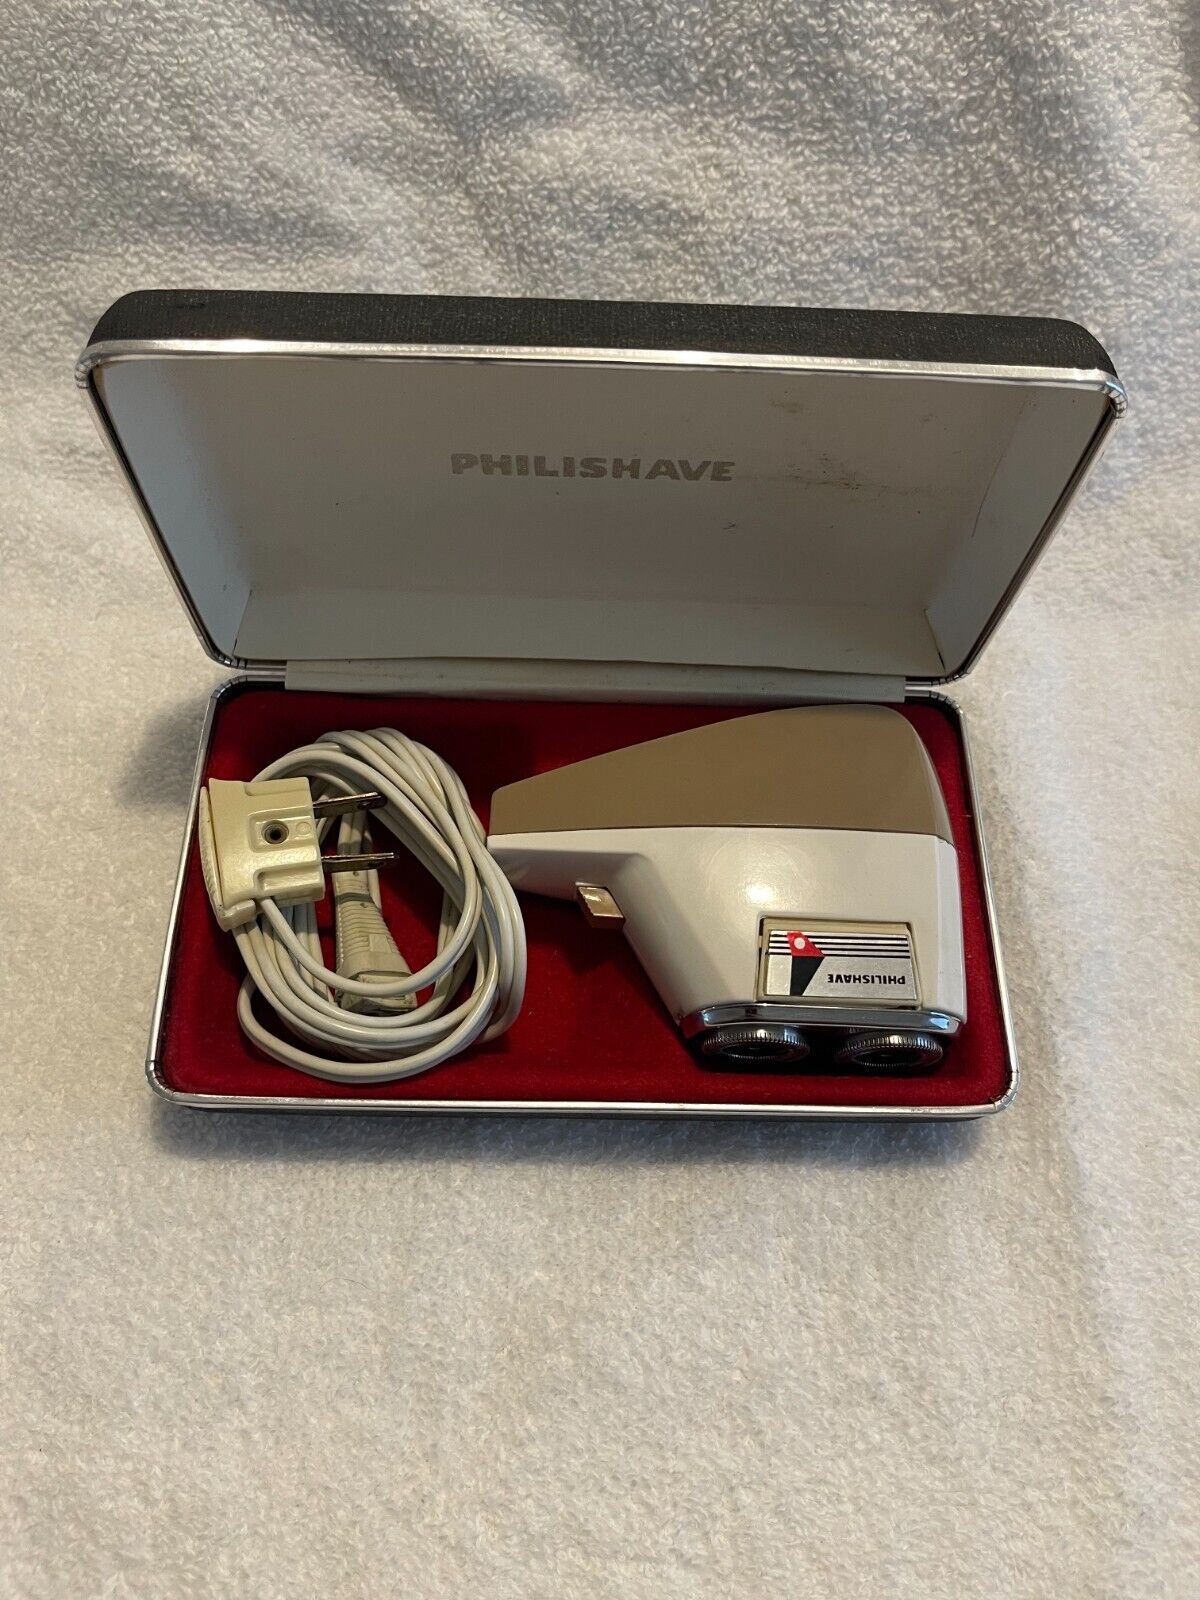 Vintage Philishave Philips SC7960 Men’s Electric Razor w/ Case TESTED N WORKING